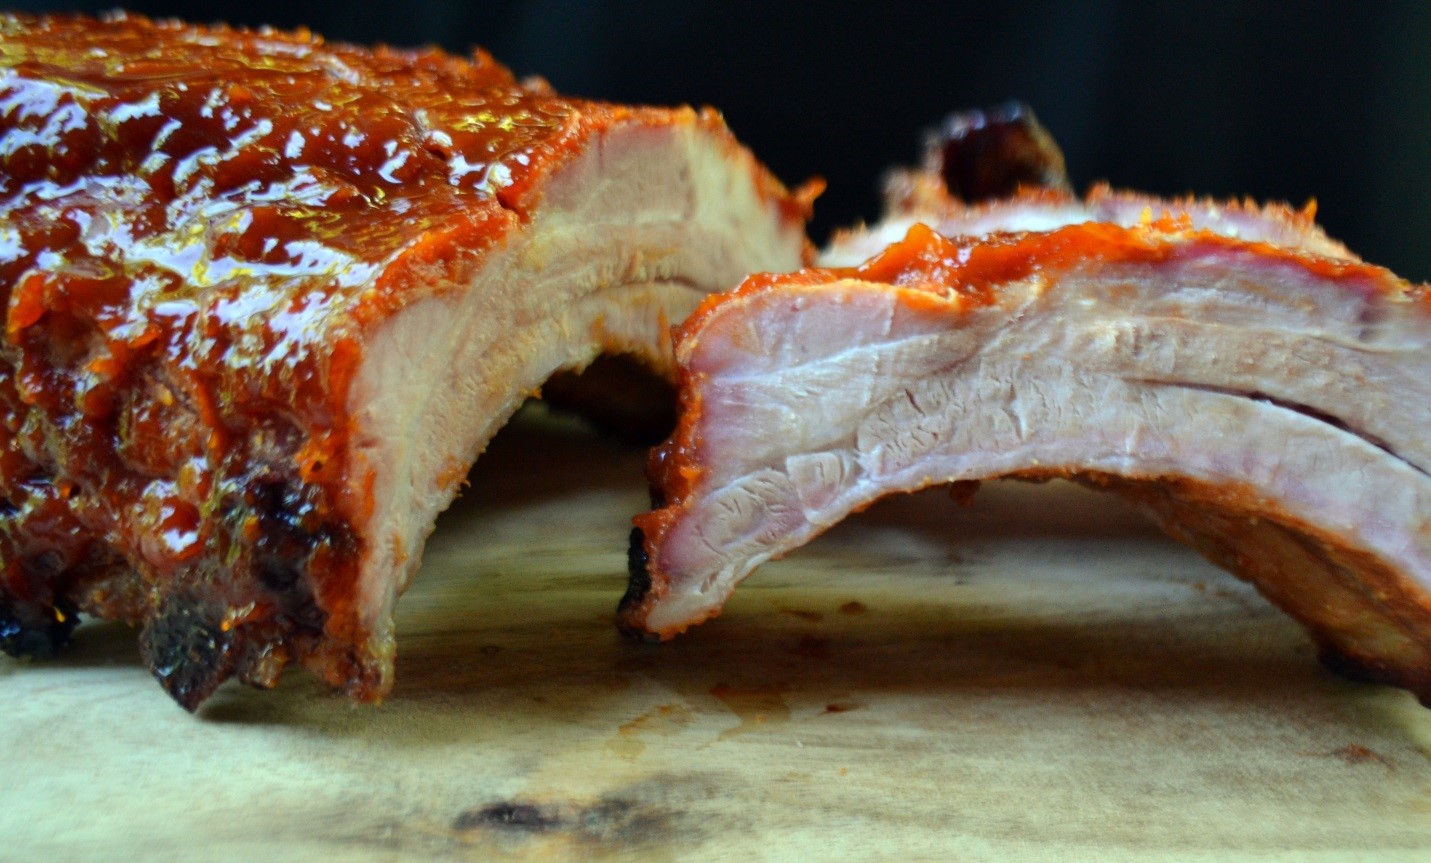 The Great Rib Debate - All You Need To Know About Ribs